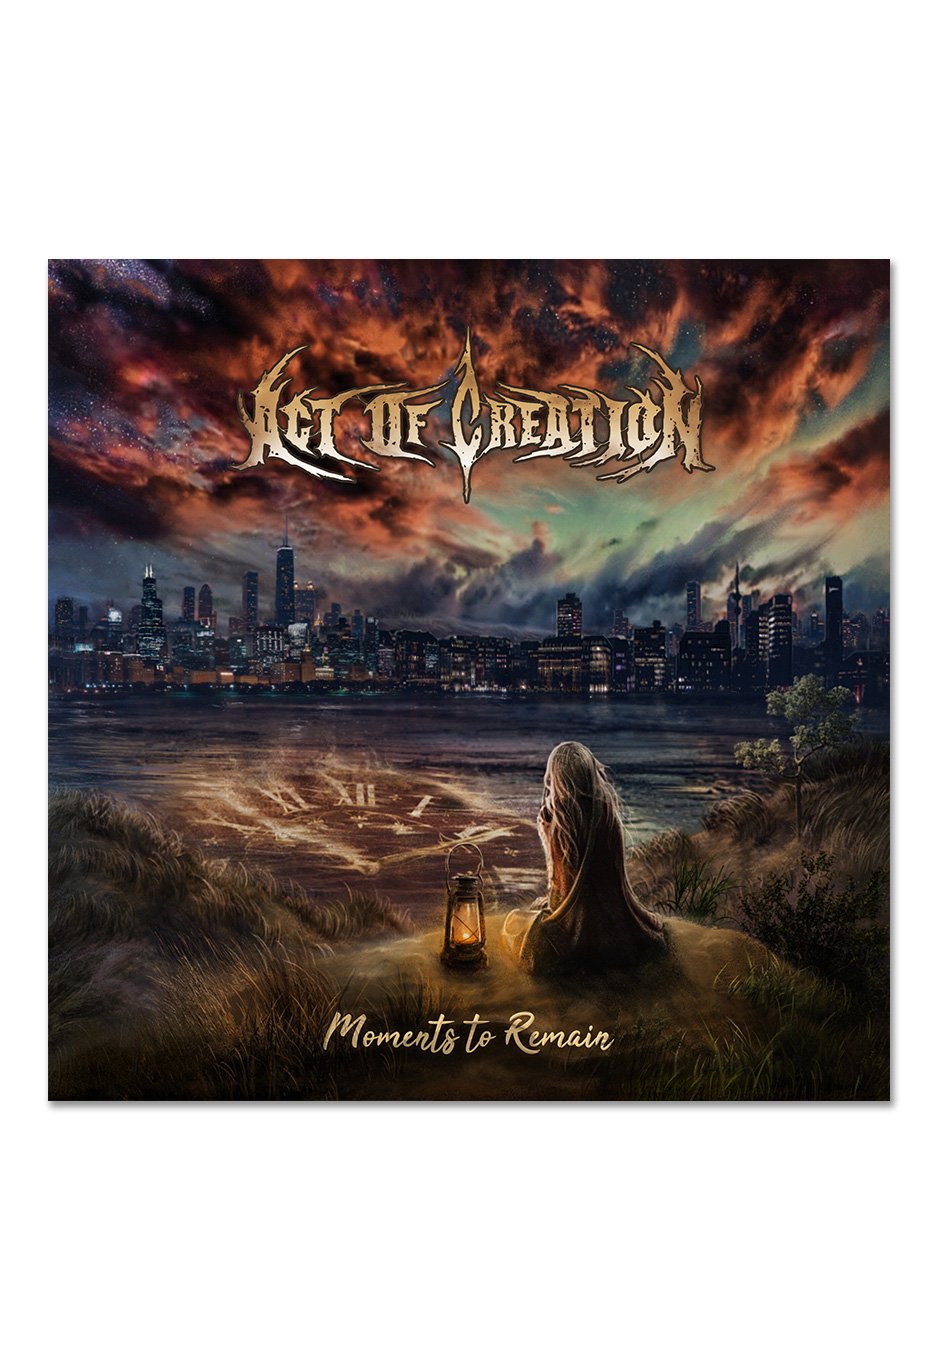 Act Of Creation - Moments To Remain Ltd. - Vinyl